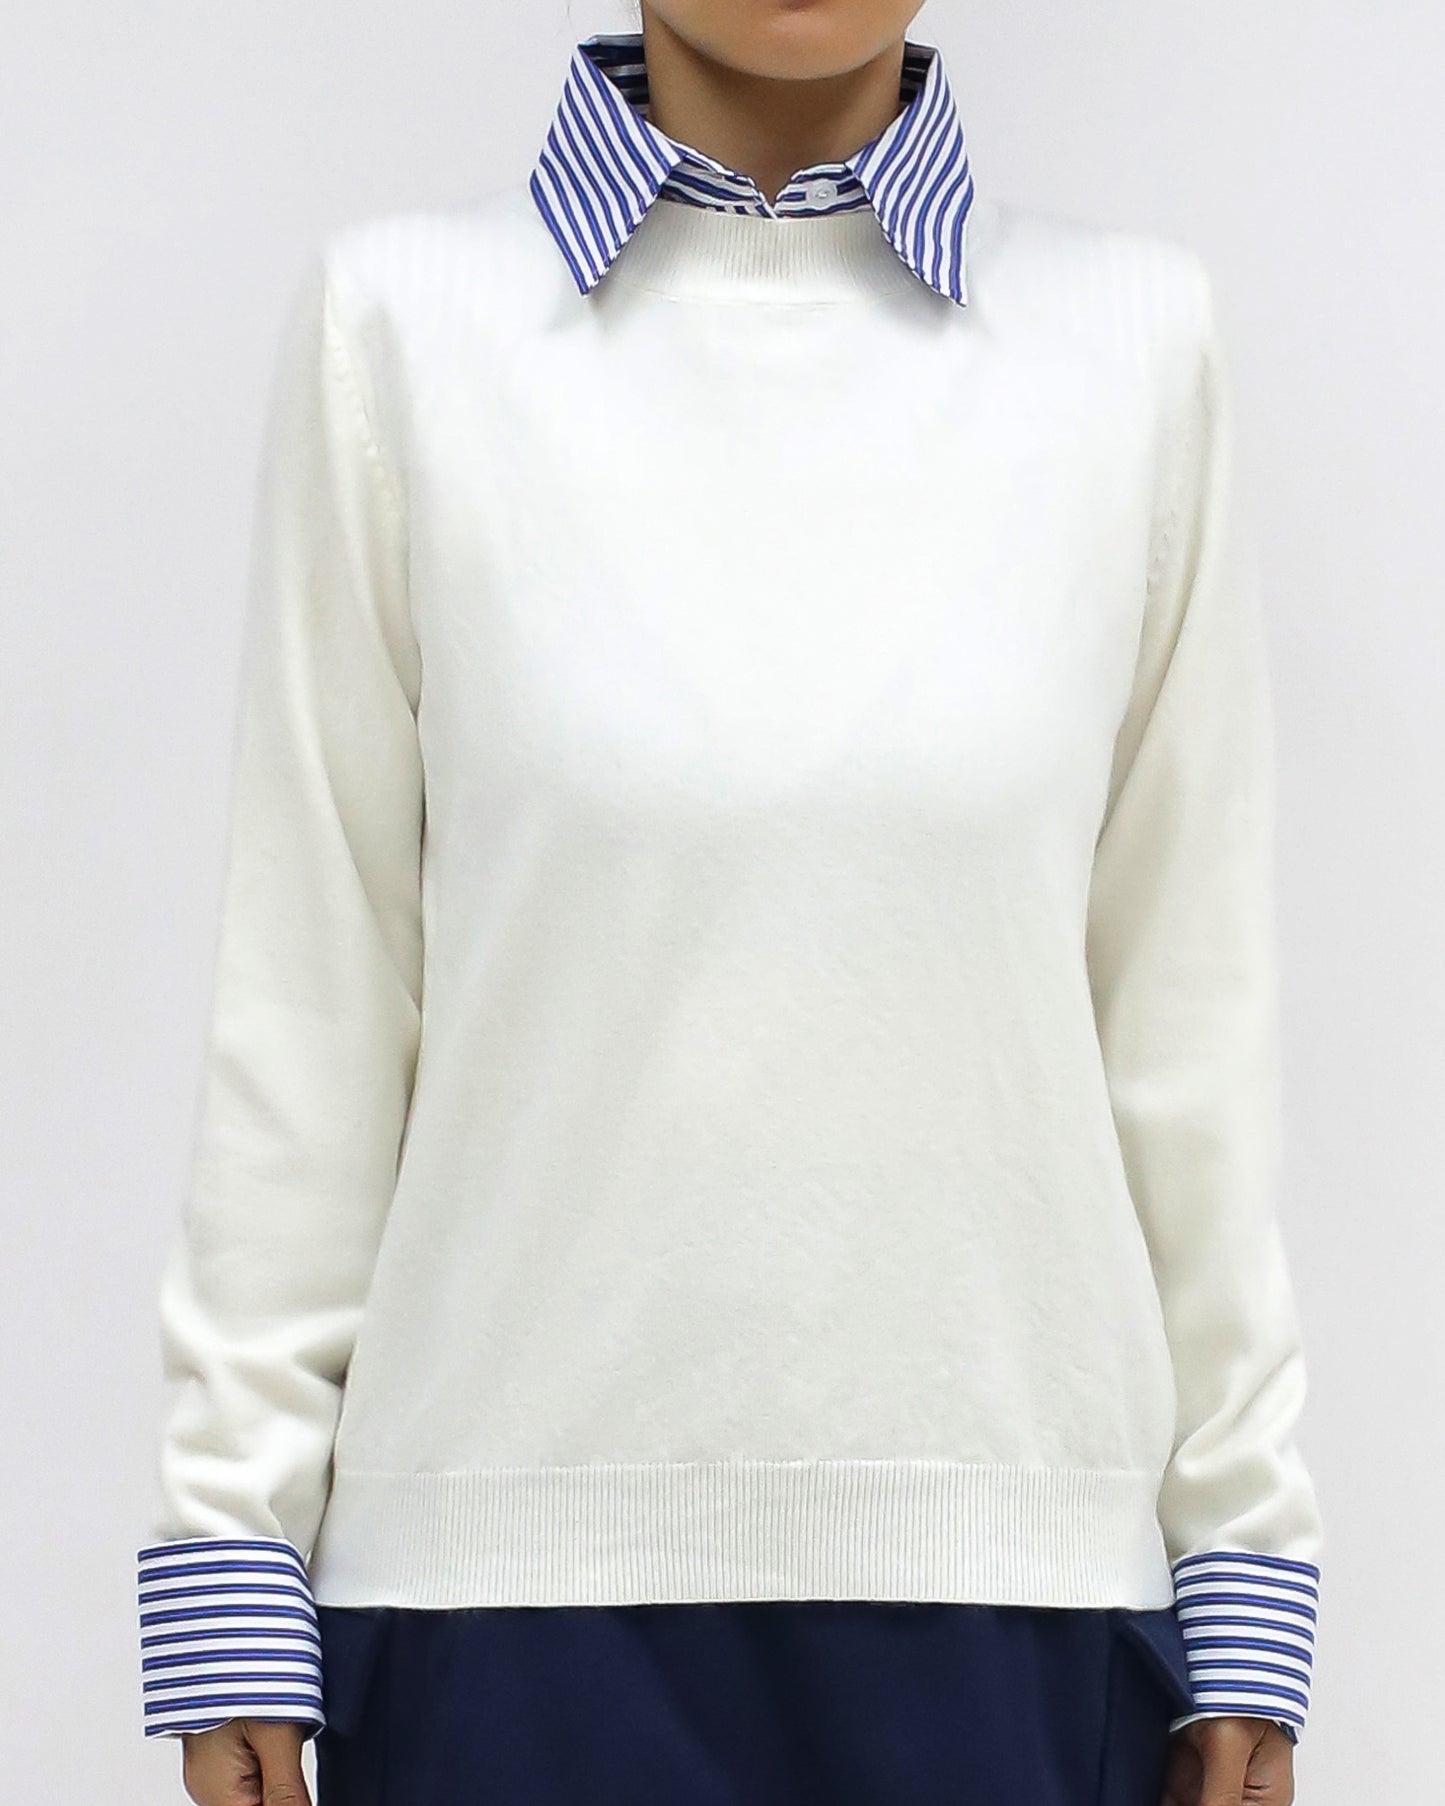 ivory knitted w/ blue stripes shirt collar & cuffs top *pre-order*